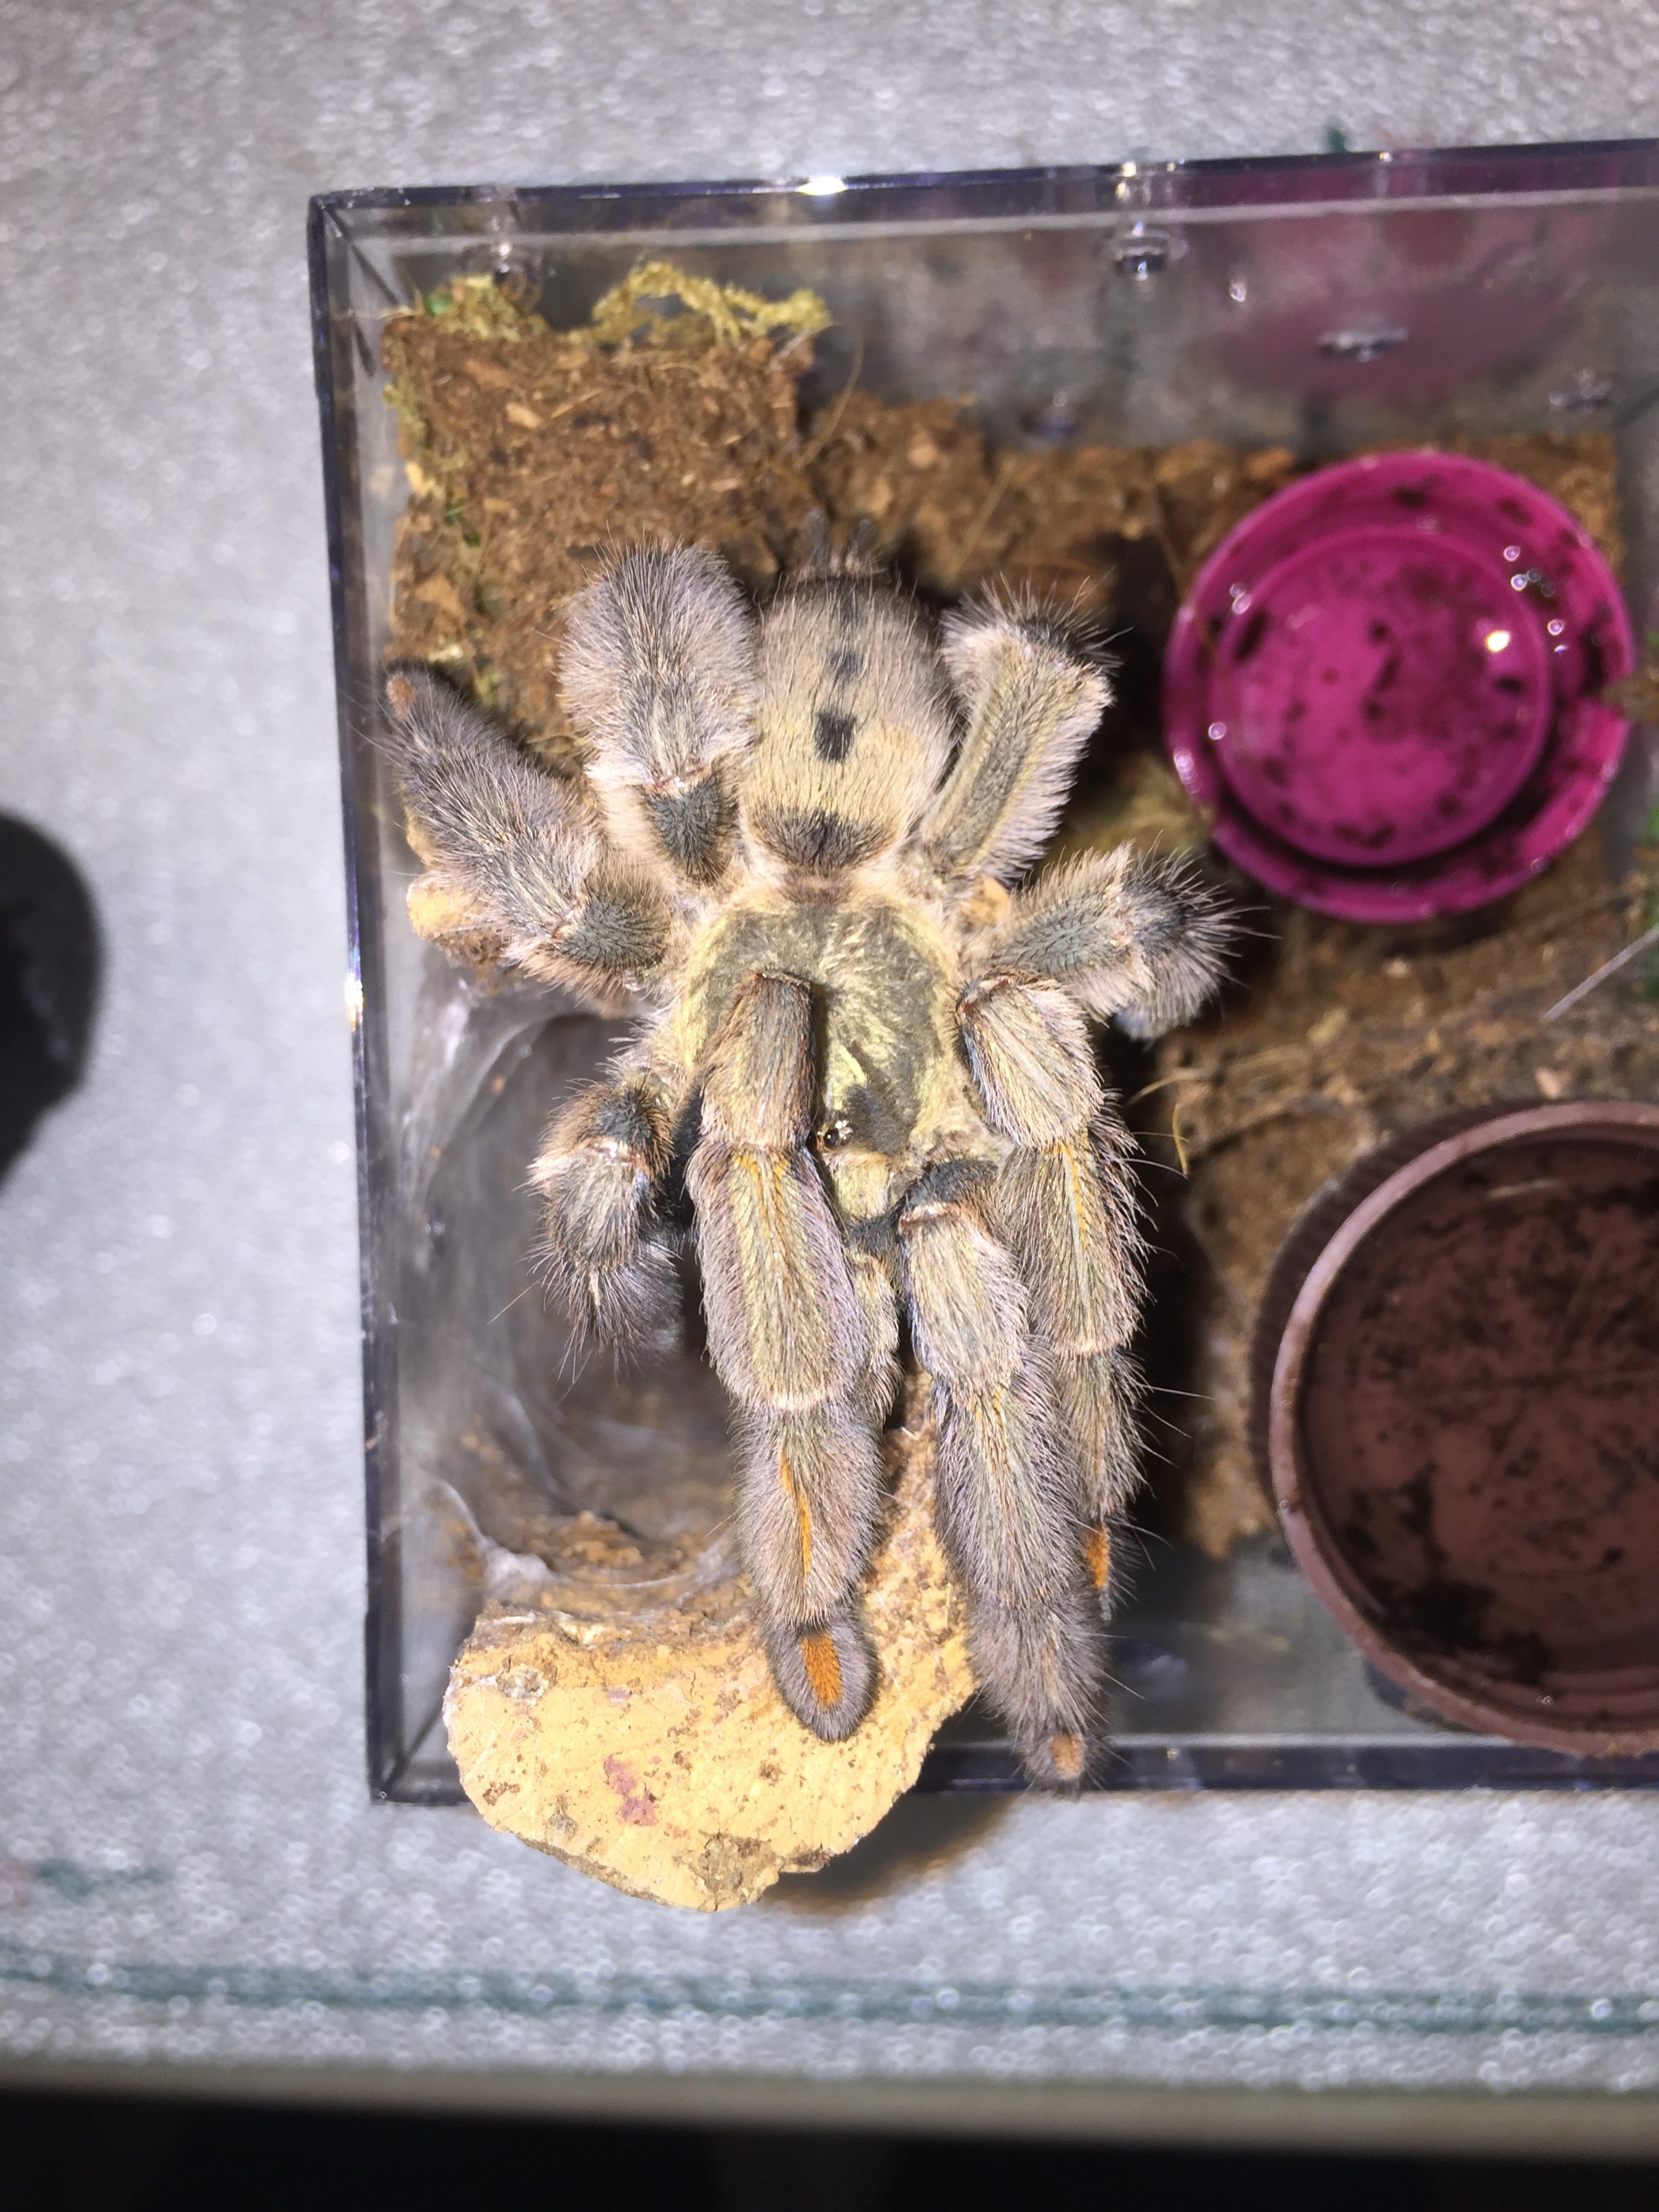 P cam just molted